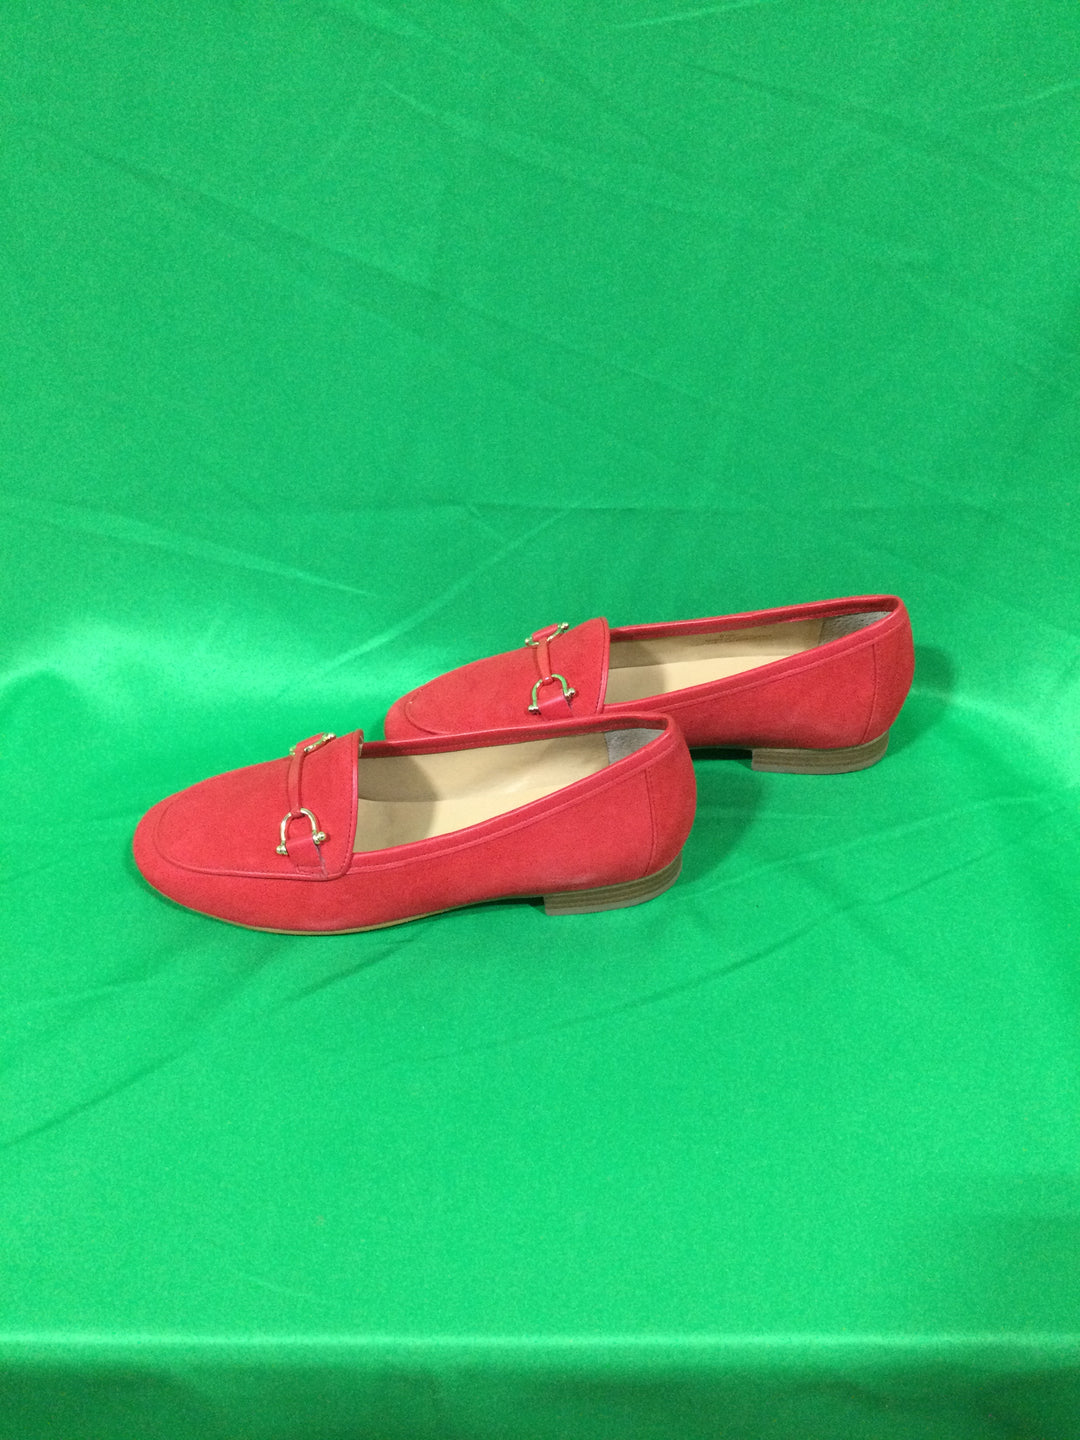 Talbots Women's Size 6 1/2 M Red Loafers